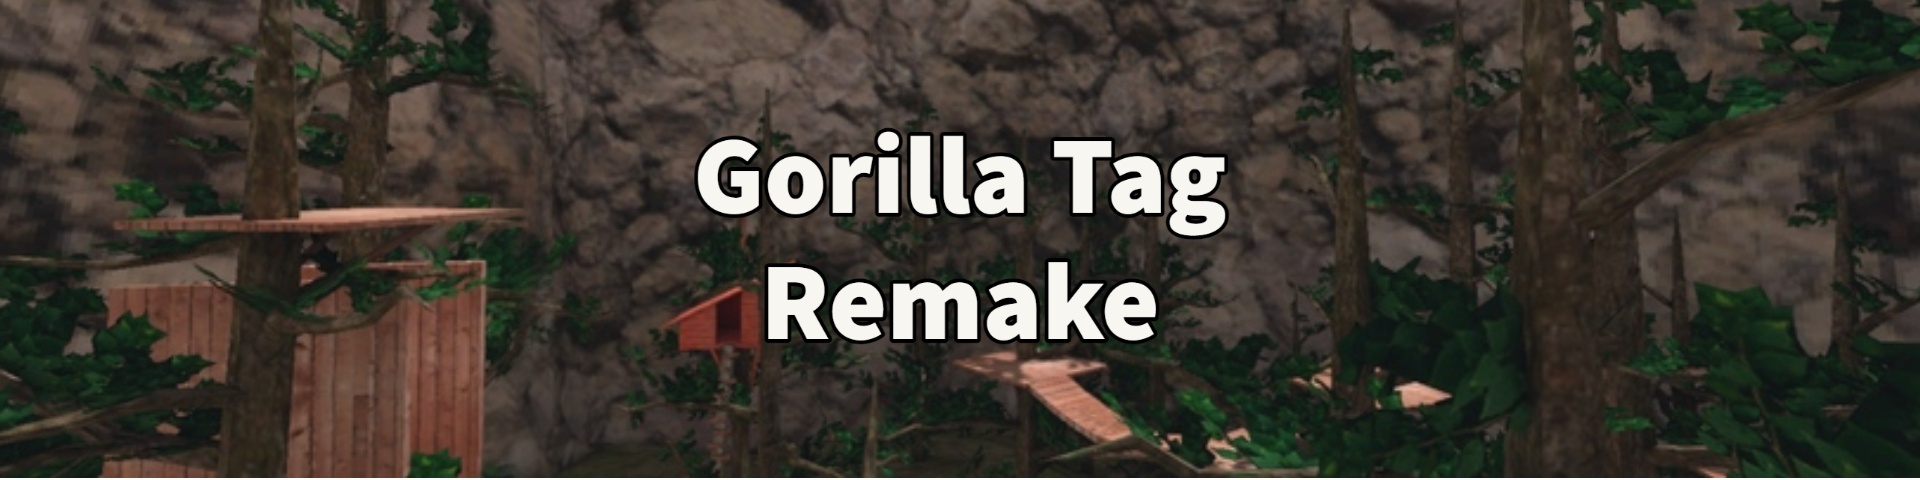 Download Gorilla Tag 2: The Monke Games APK 0.4.1 for Android 